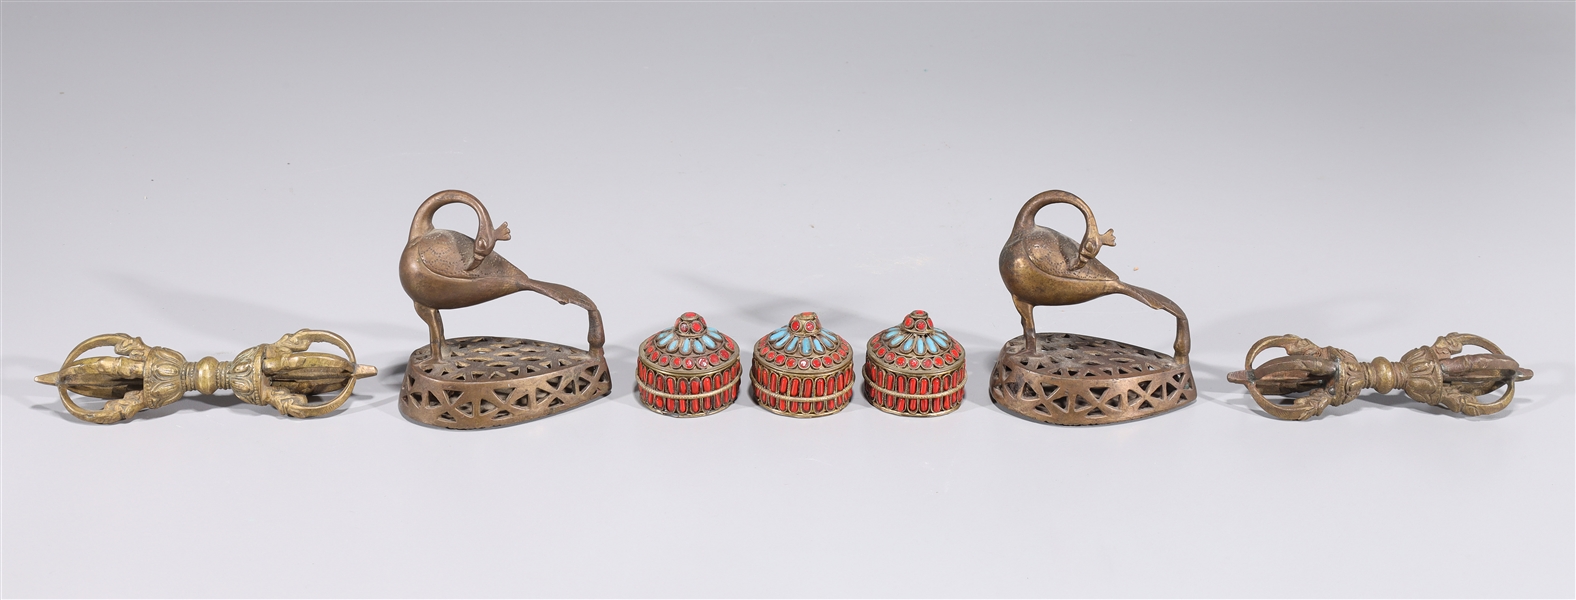 Group of Tibetan Ornaments & Artifacts